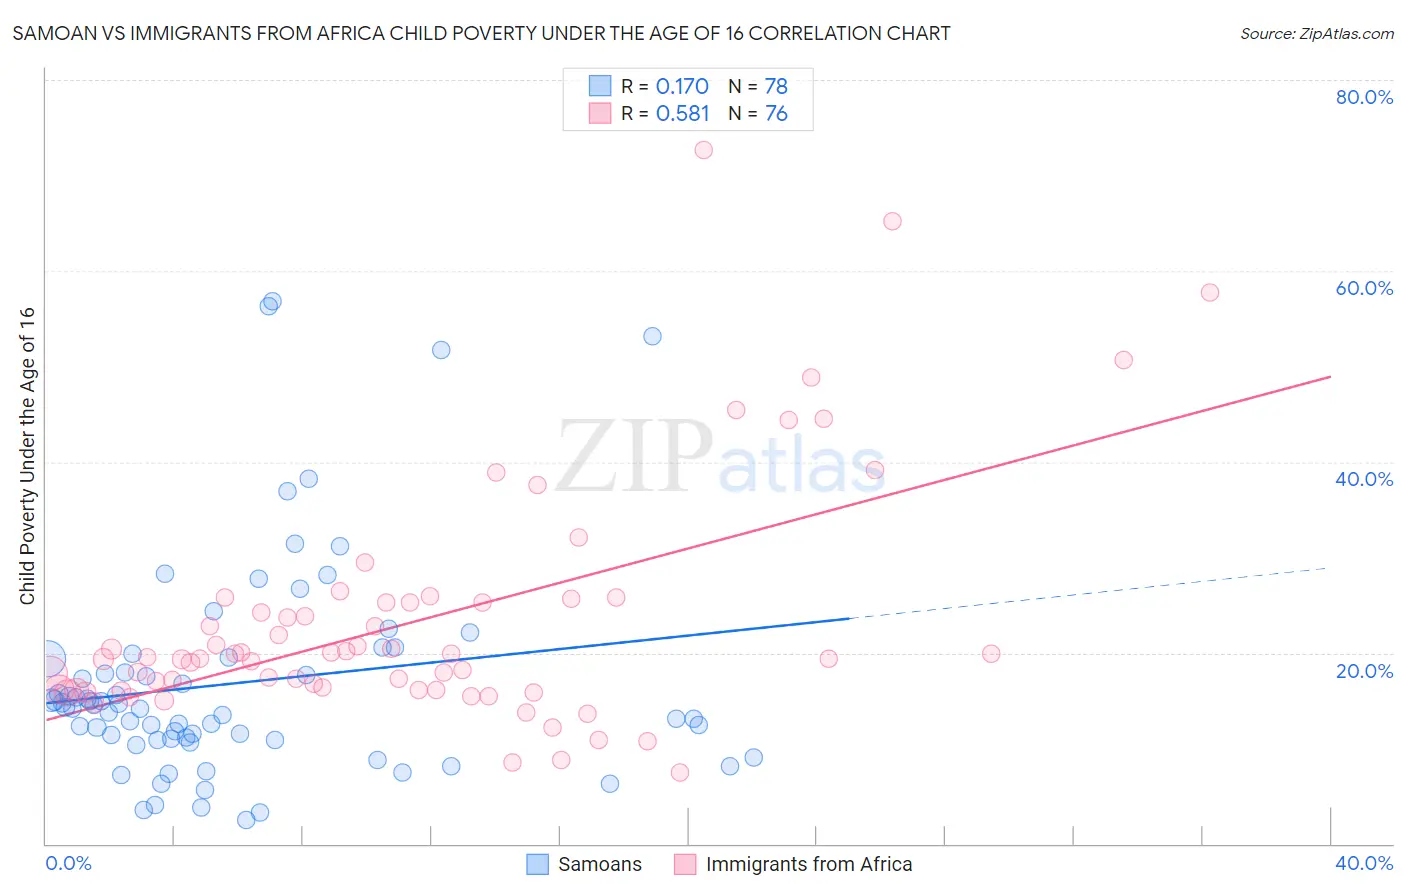 Samoan vs Immigrants from Africa Child Poverty Under the Age of 16